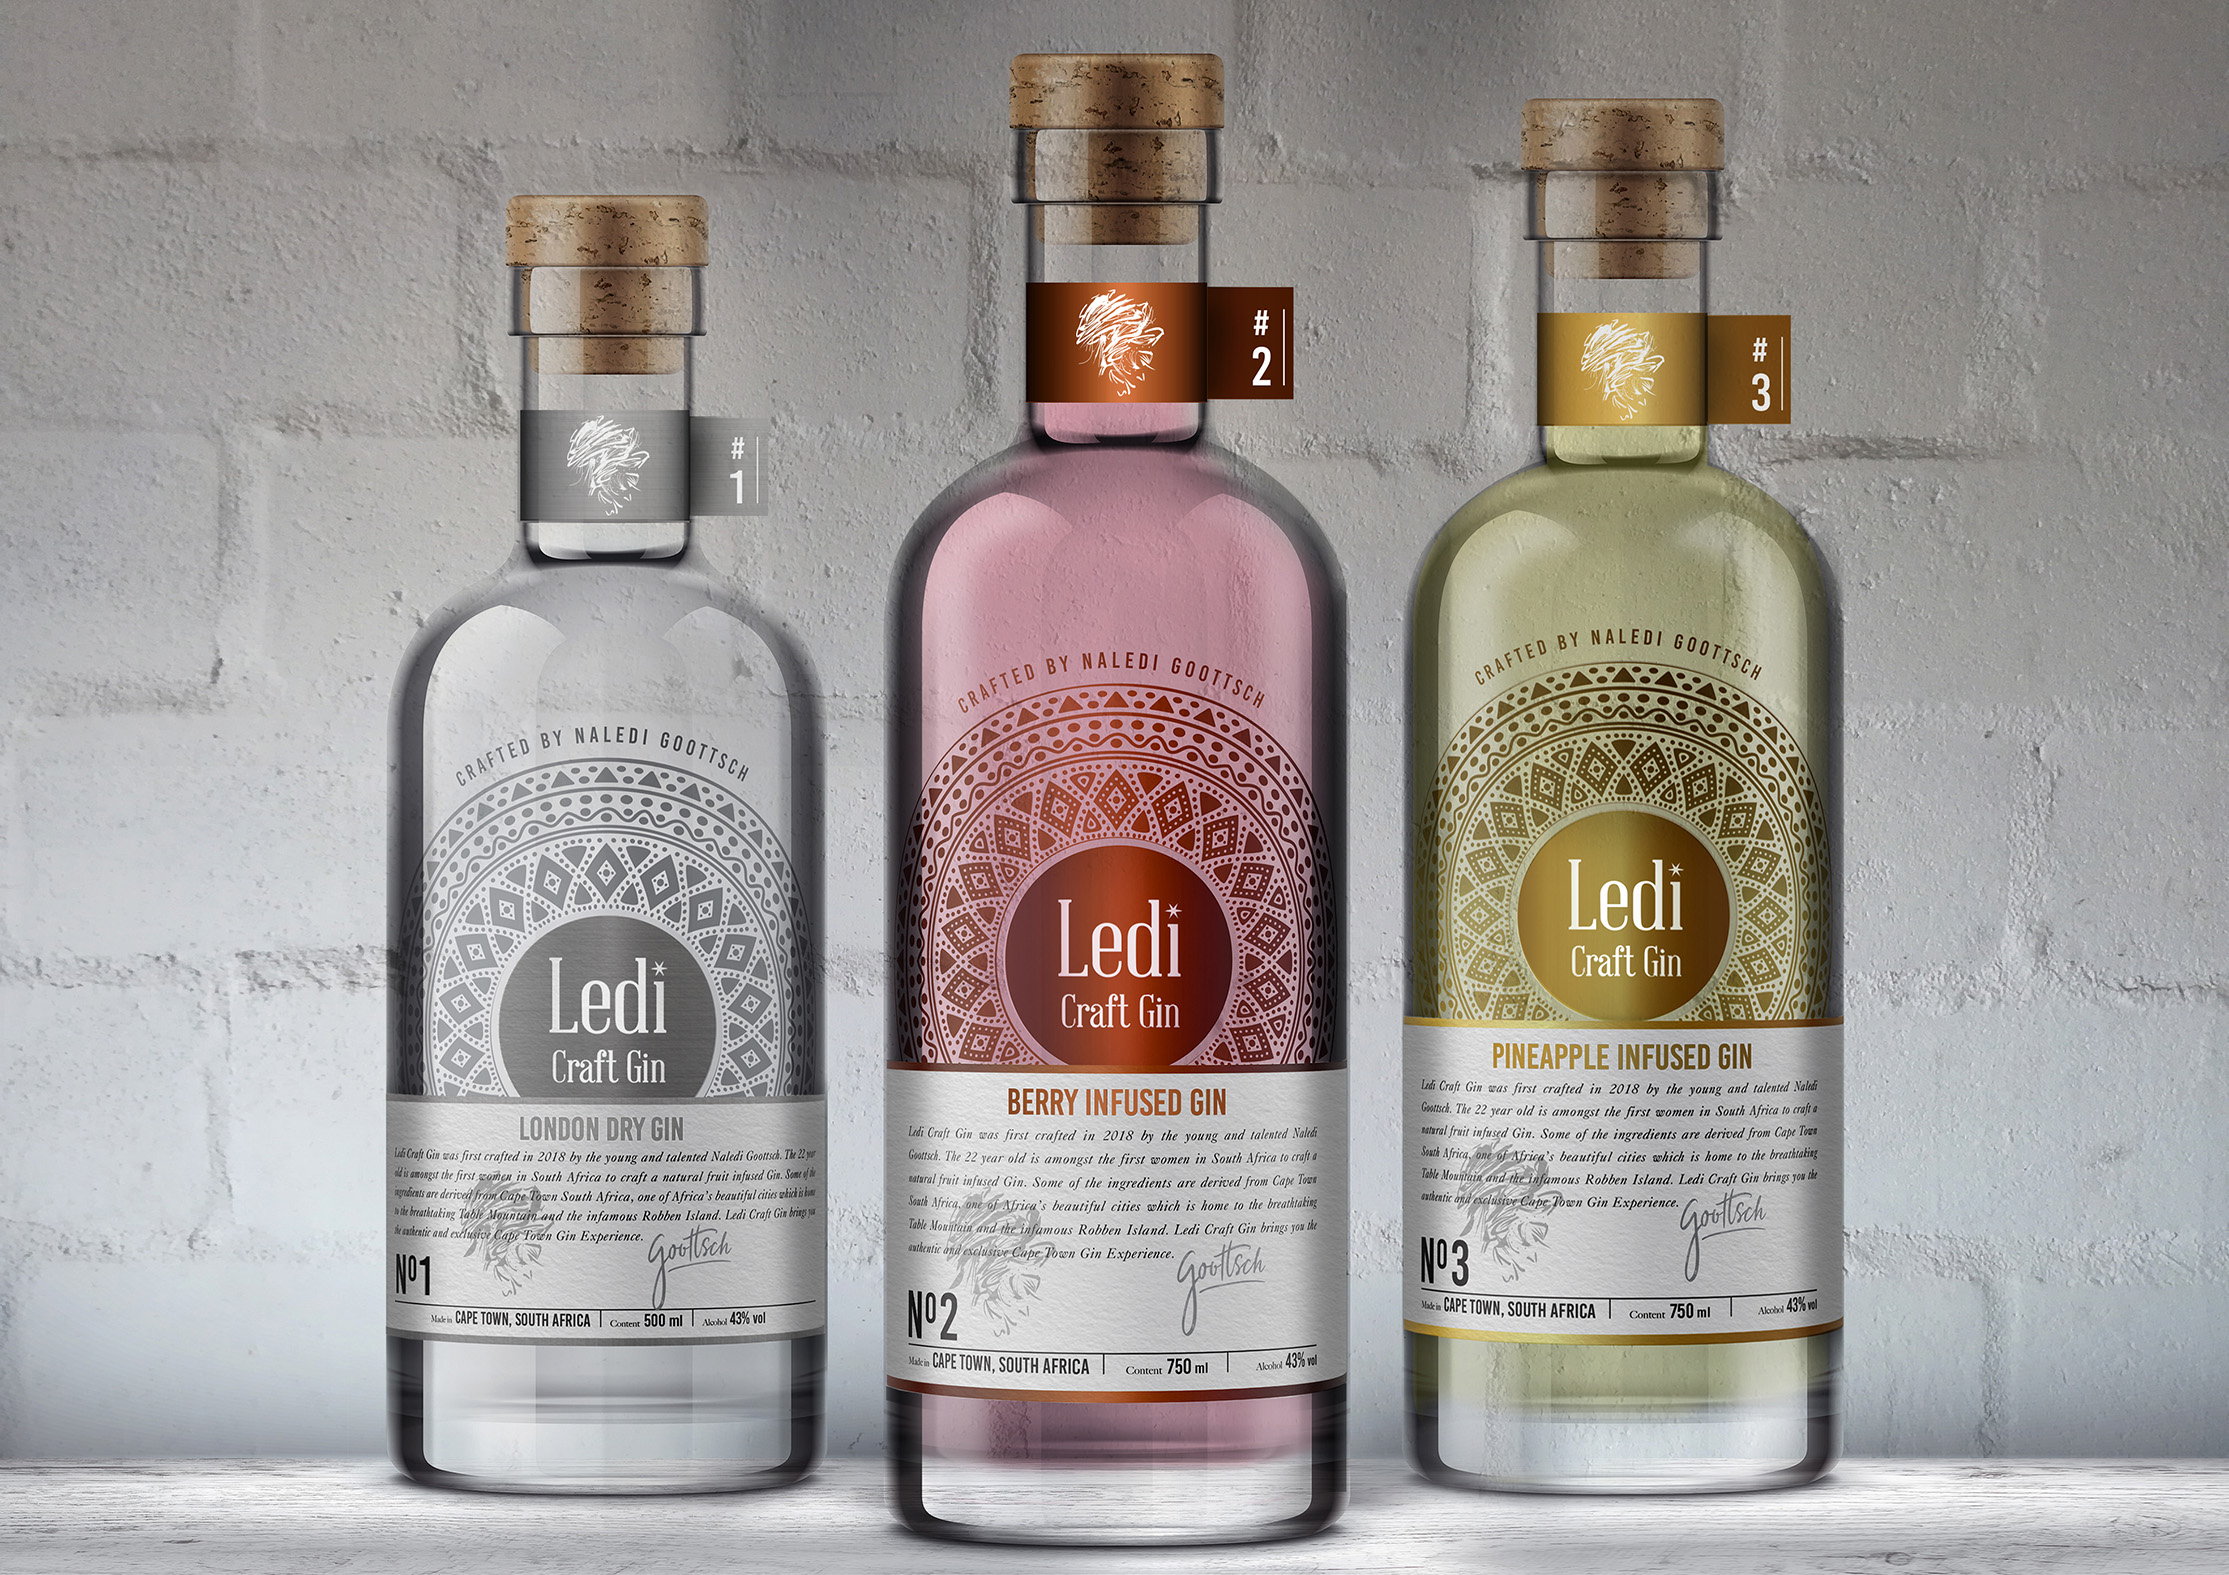 Todd Anderson Creates Branding and Packaging Design for Ledi Craft Gin